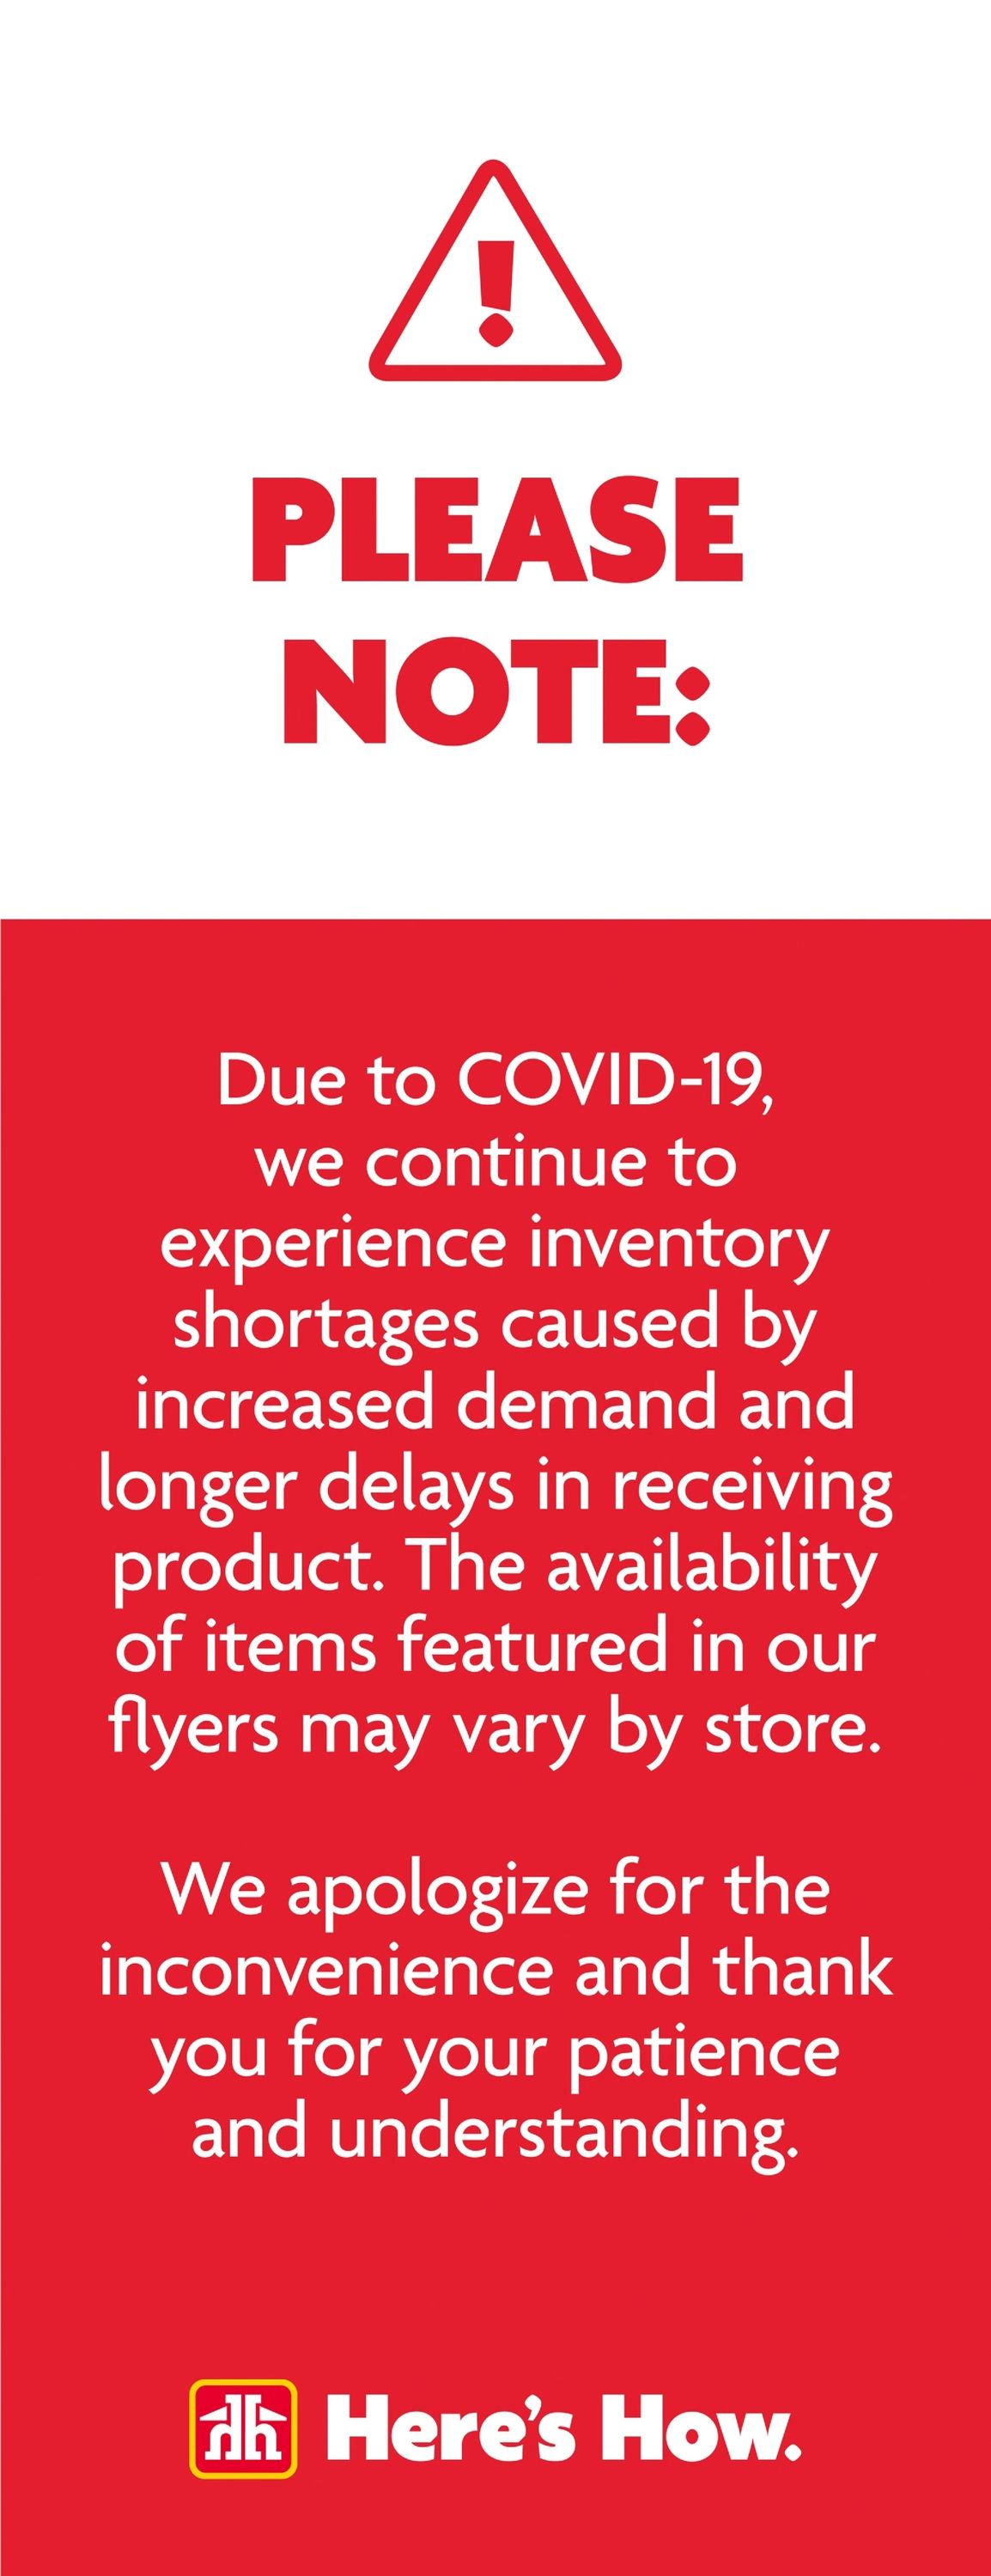 Home Hardware Flyer from 08/25/2022